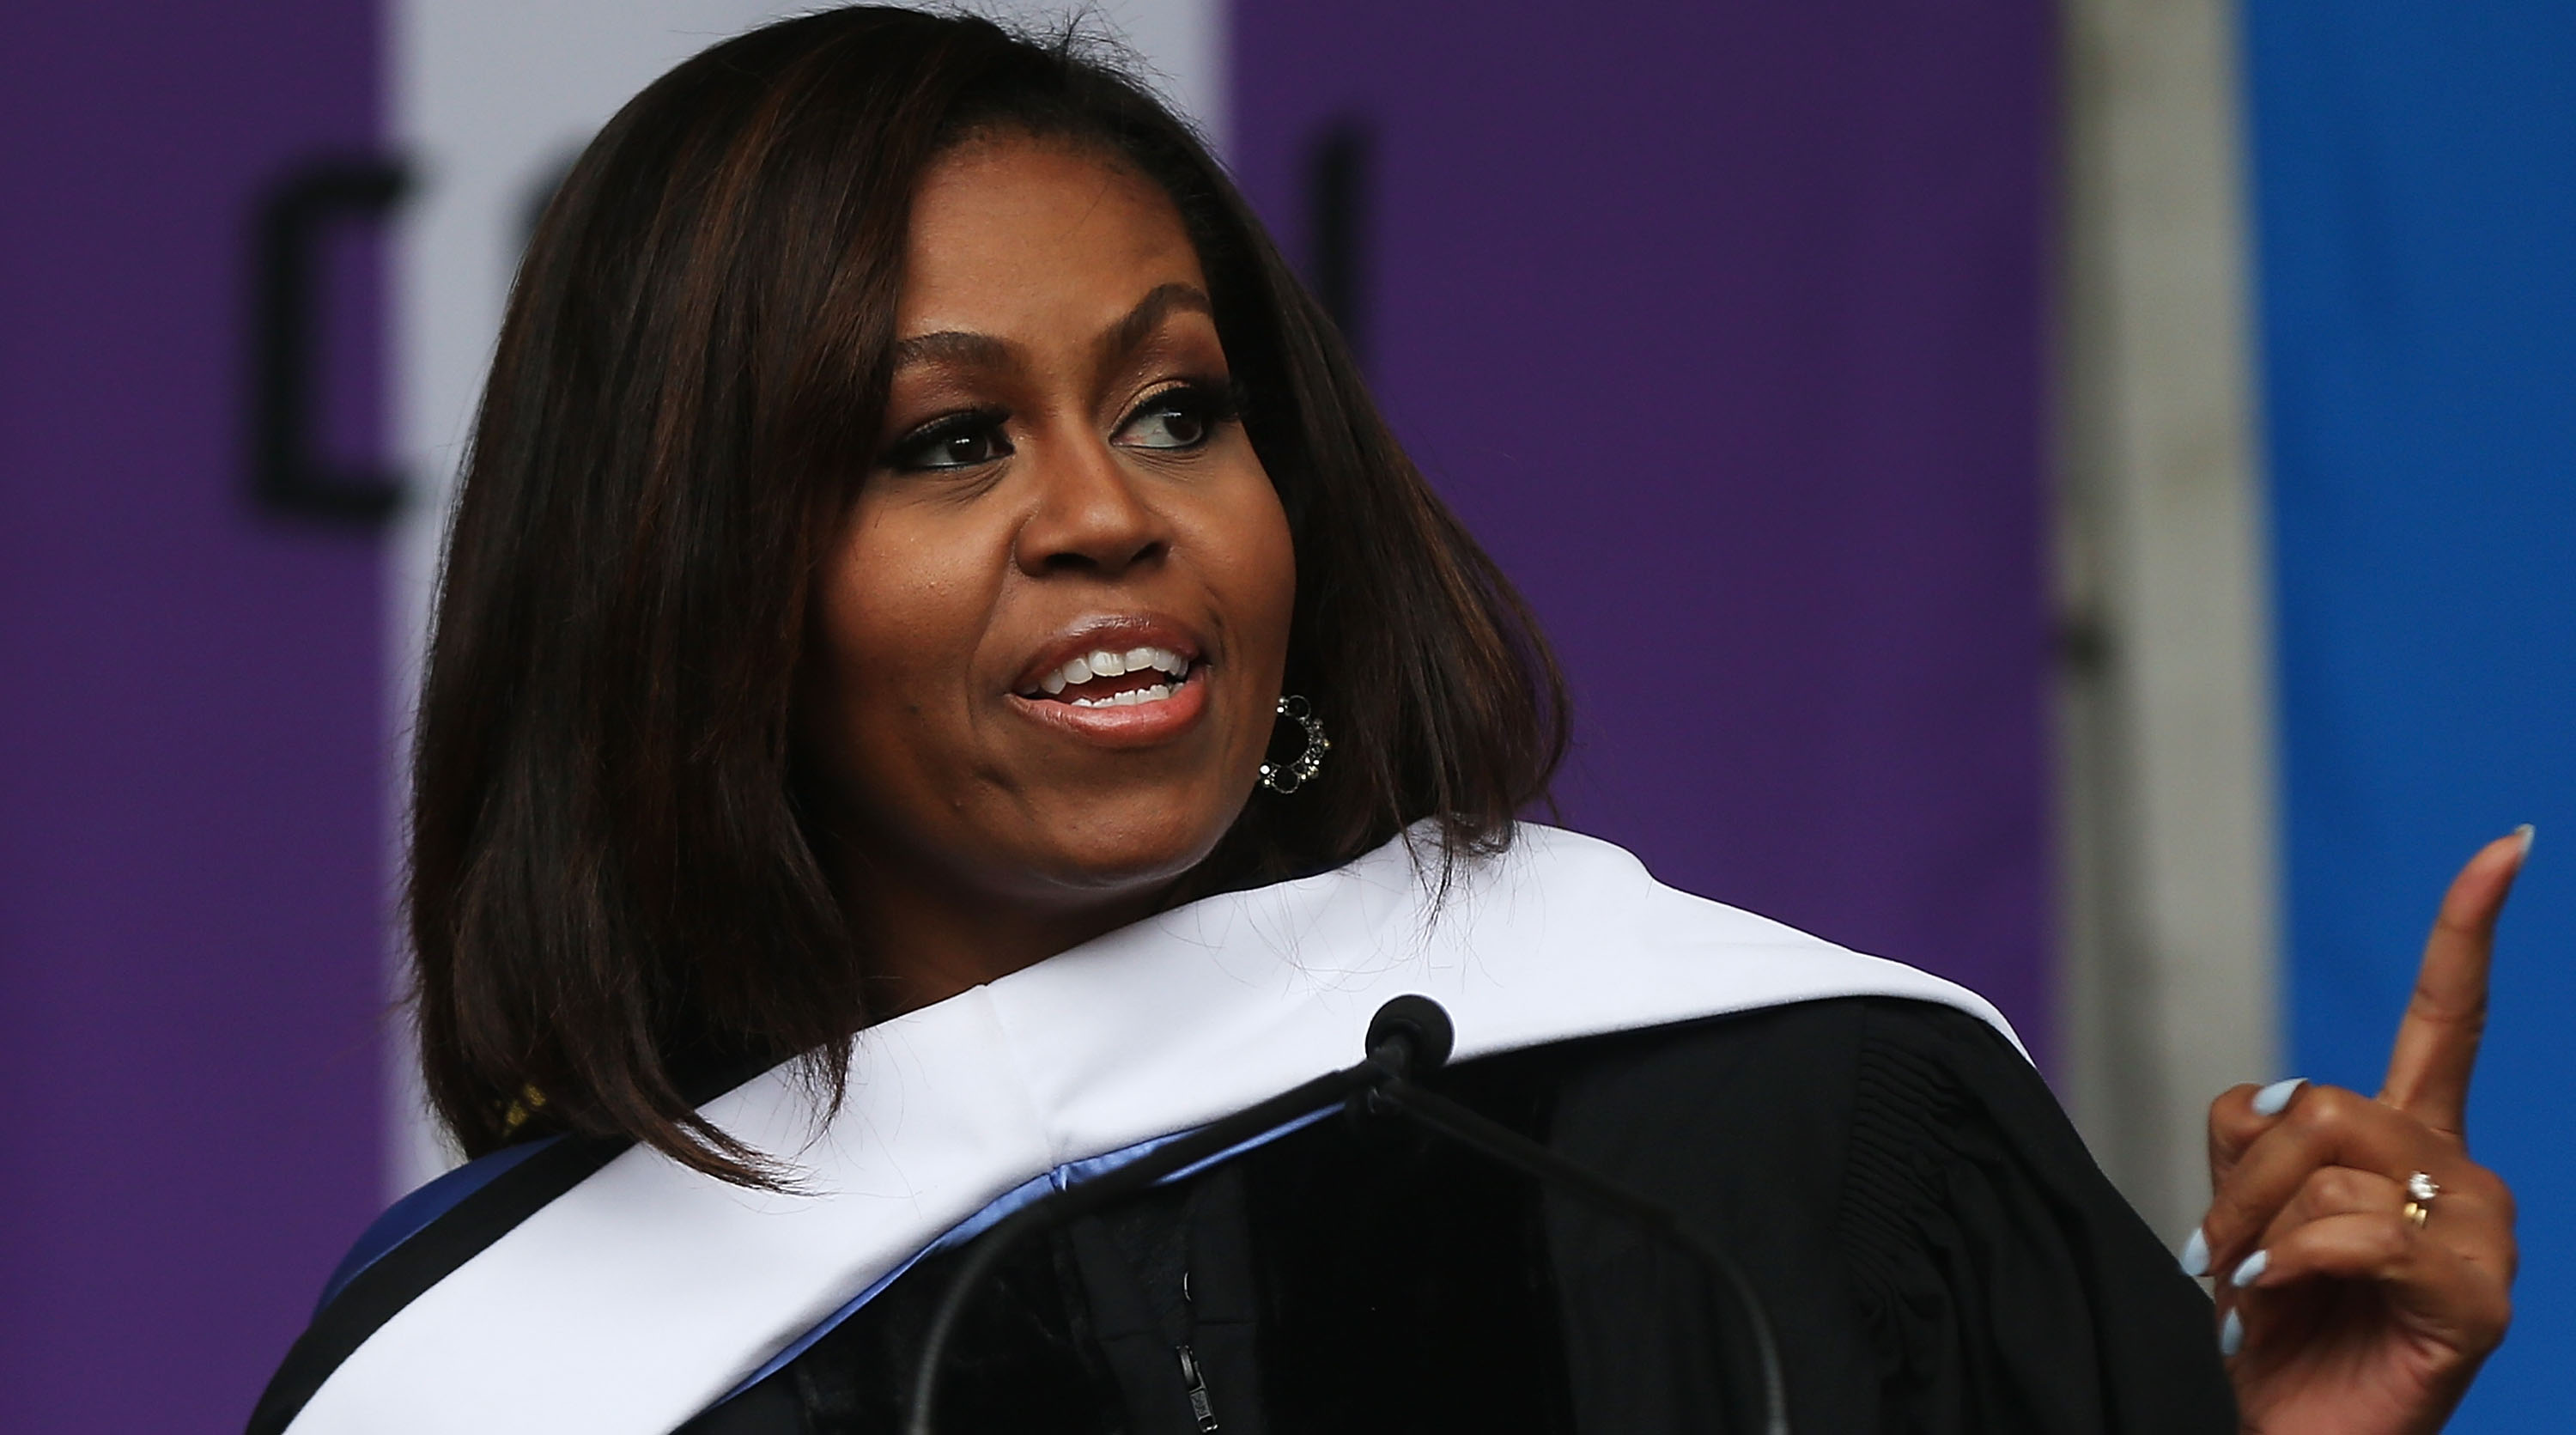 Michelle Obama delivers the commencement speech after being presented with an honorary doctorate of humane letters at City College in New York City on June 3, 2016. (Spencer Platt—Getty Images)